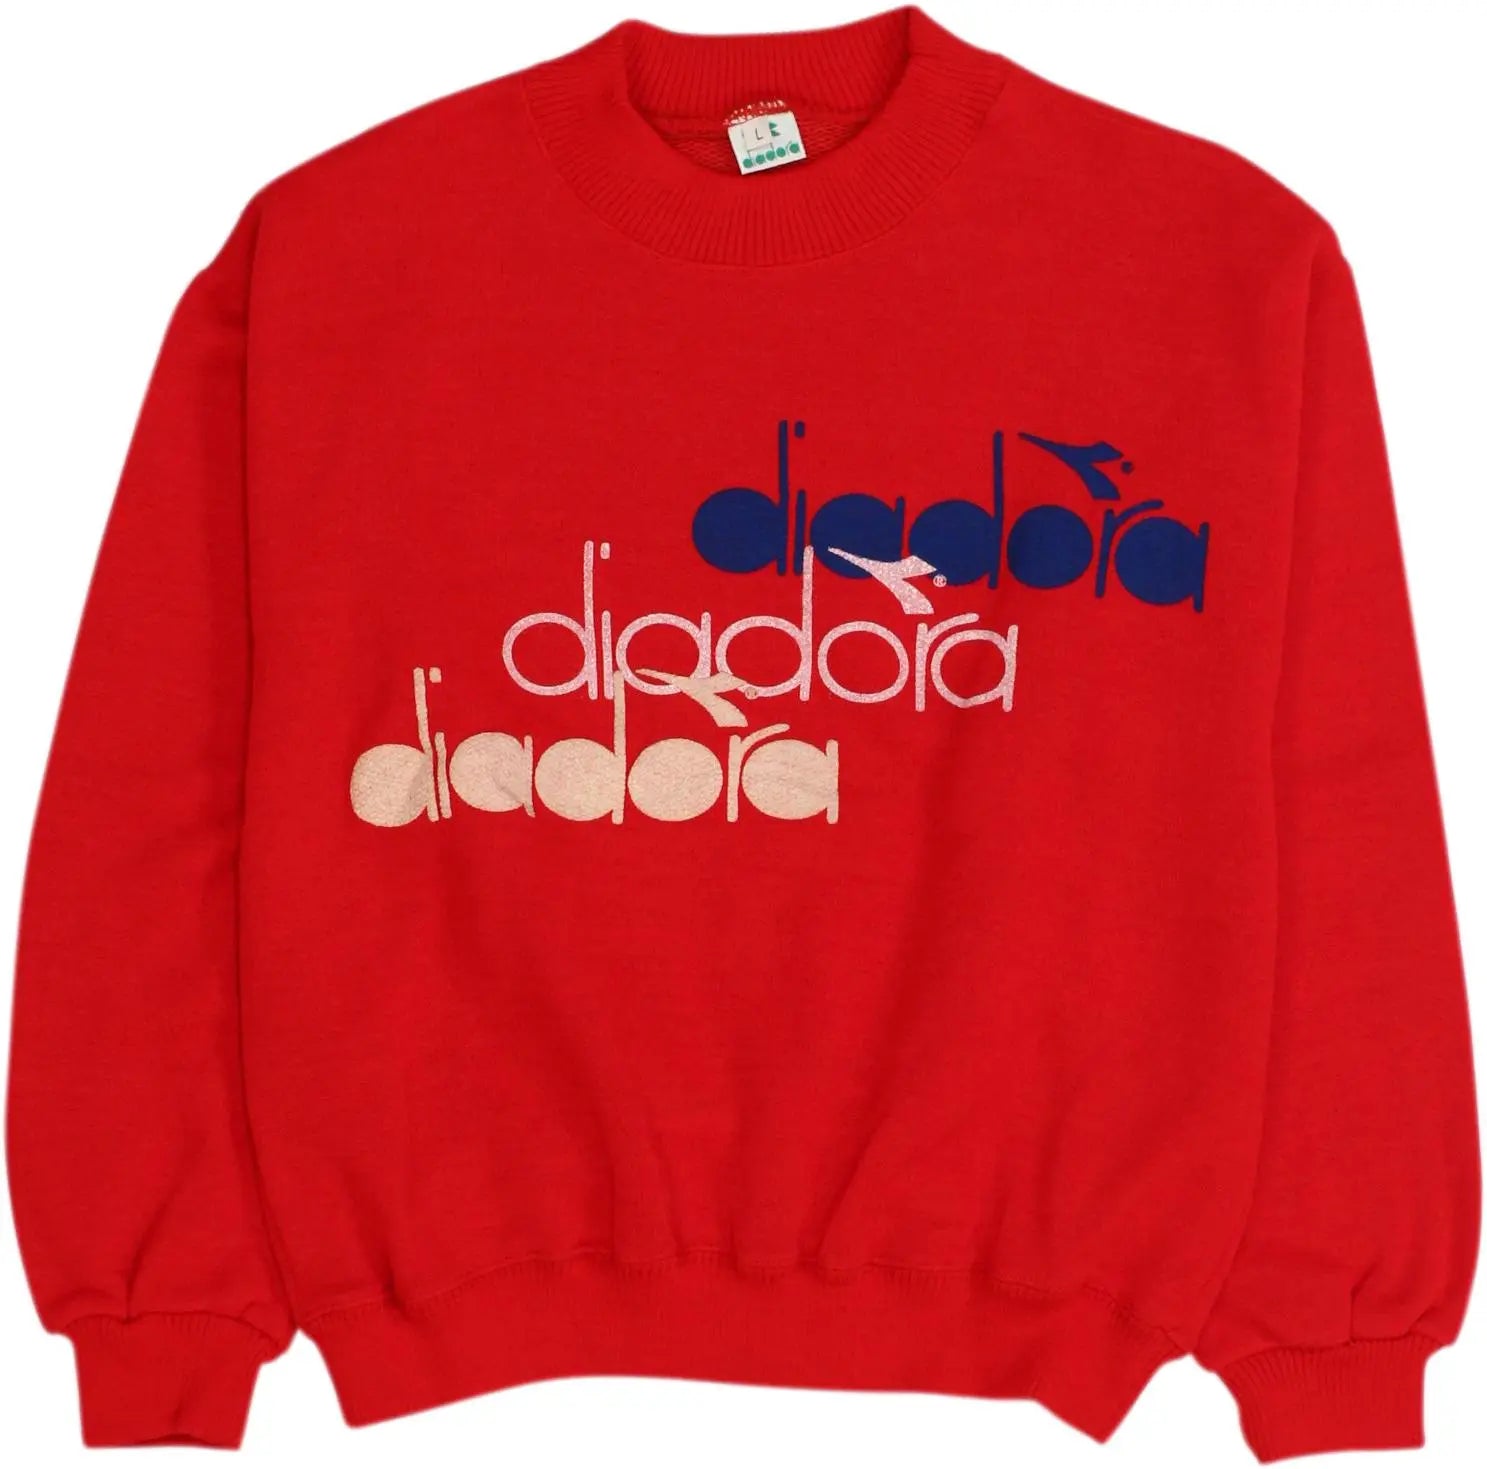 Diadora - Red Sweater by Diadora- ThriftTale.com - Vintage and second handclothing